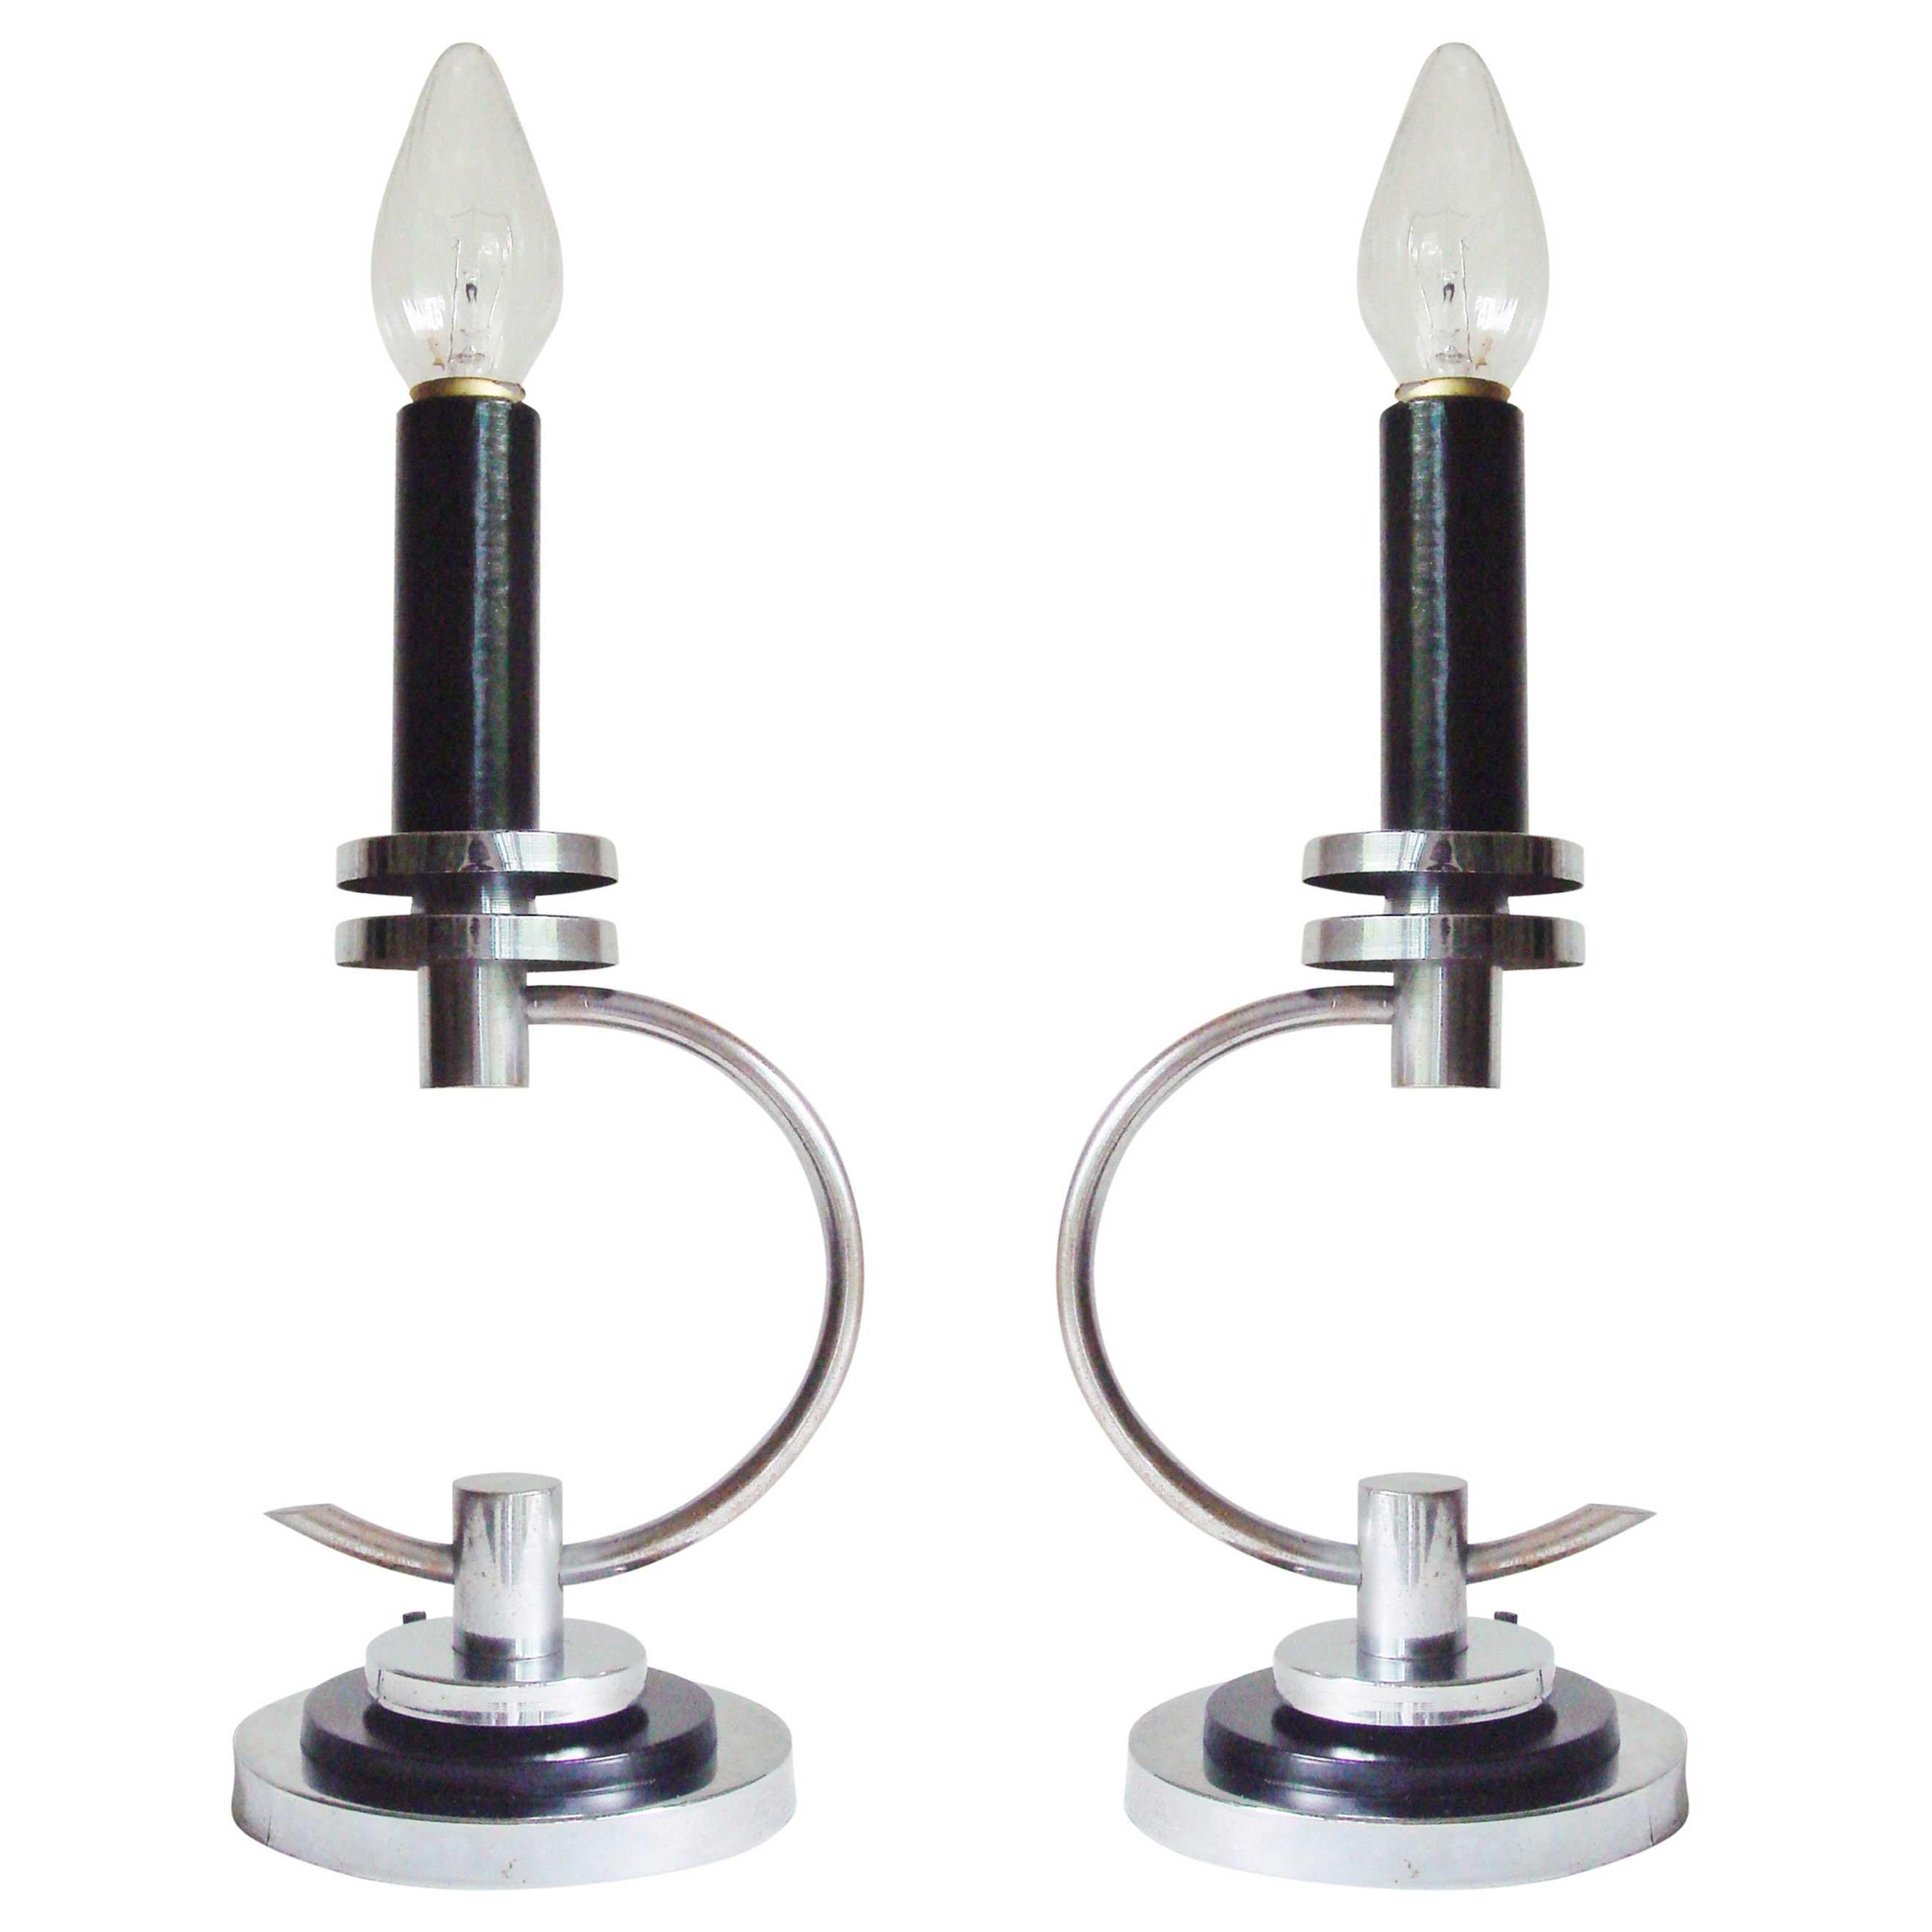 Pair of American Art Deco Chrome and Black Enamel Candle-Form Table Lamps